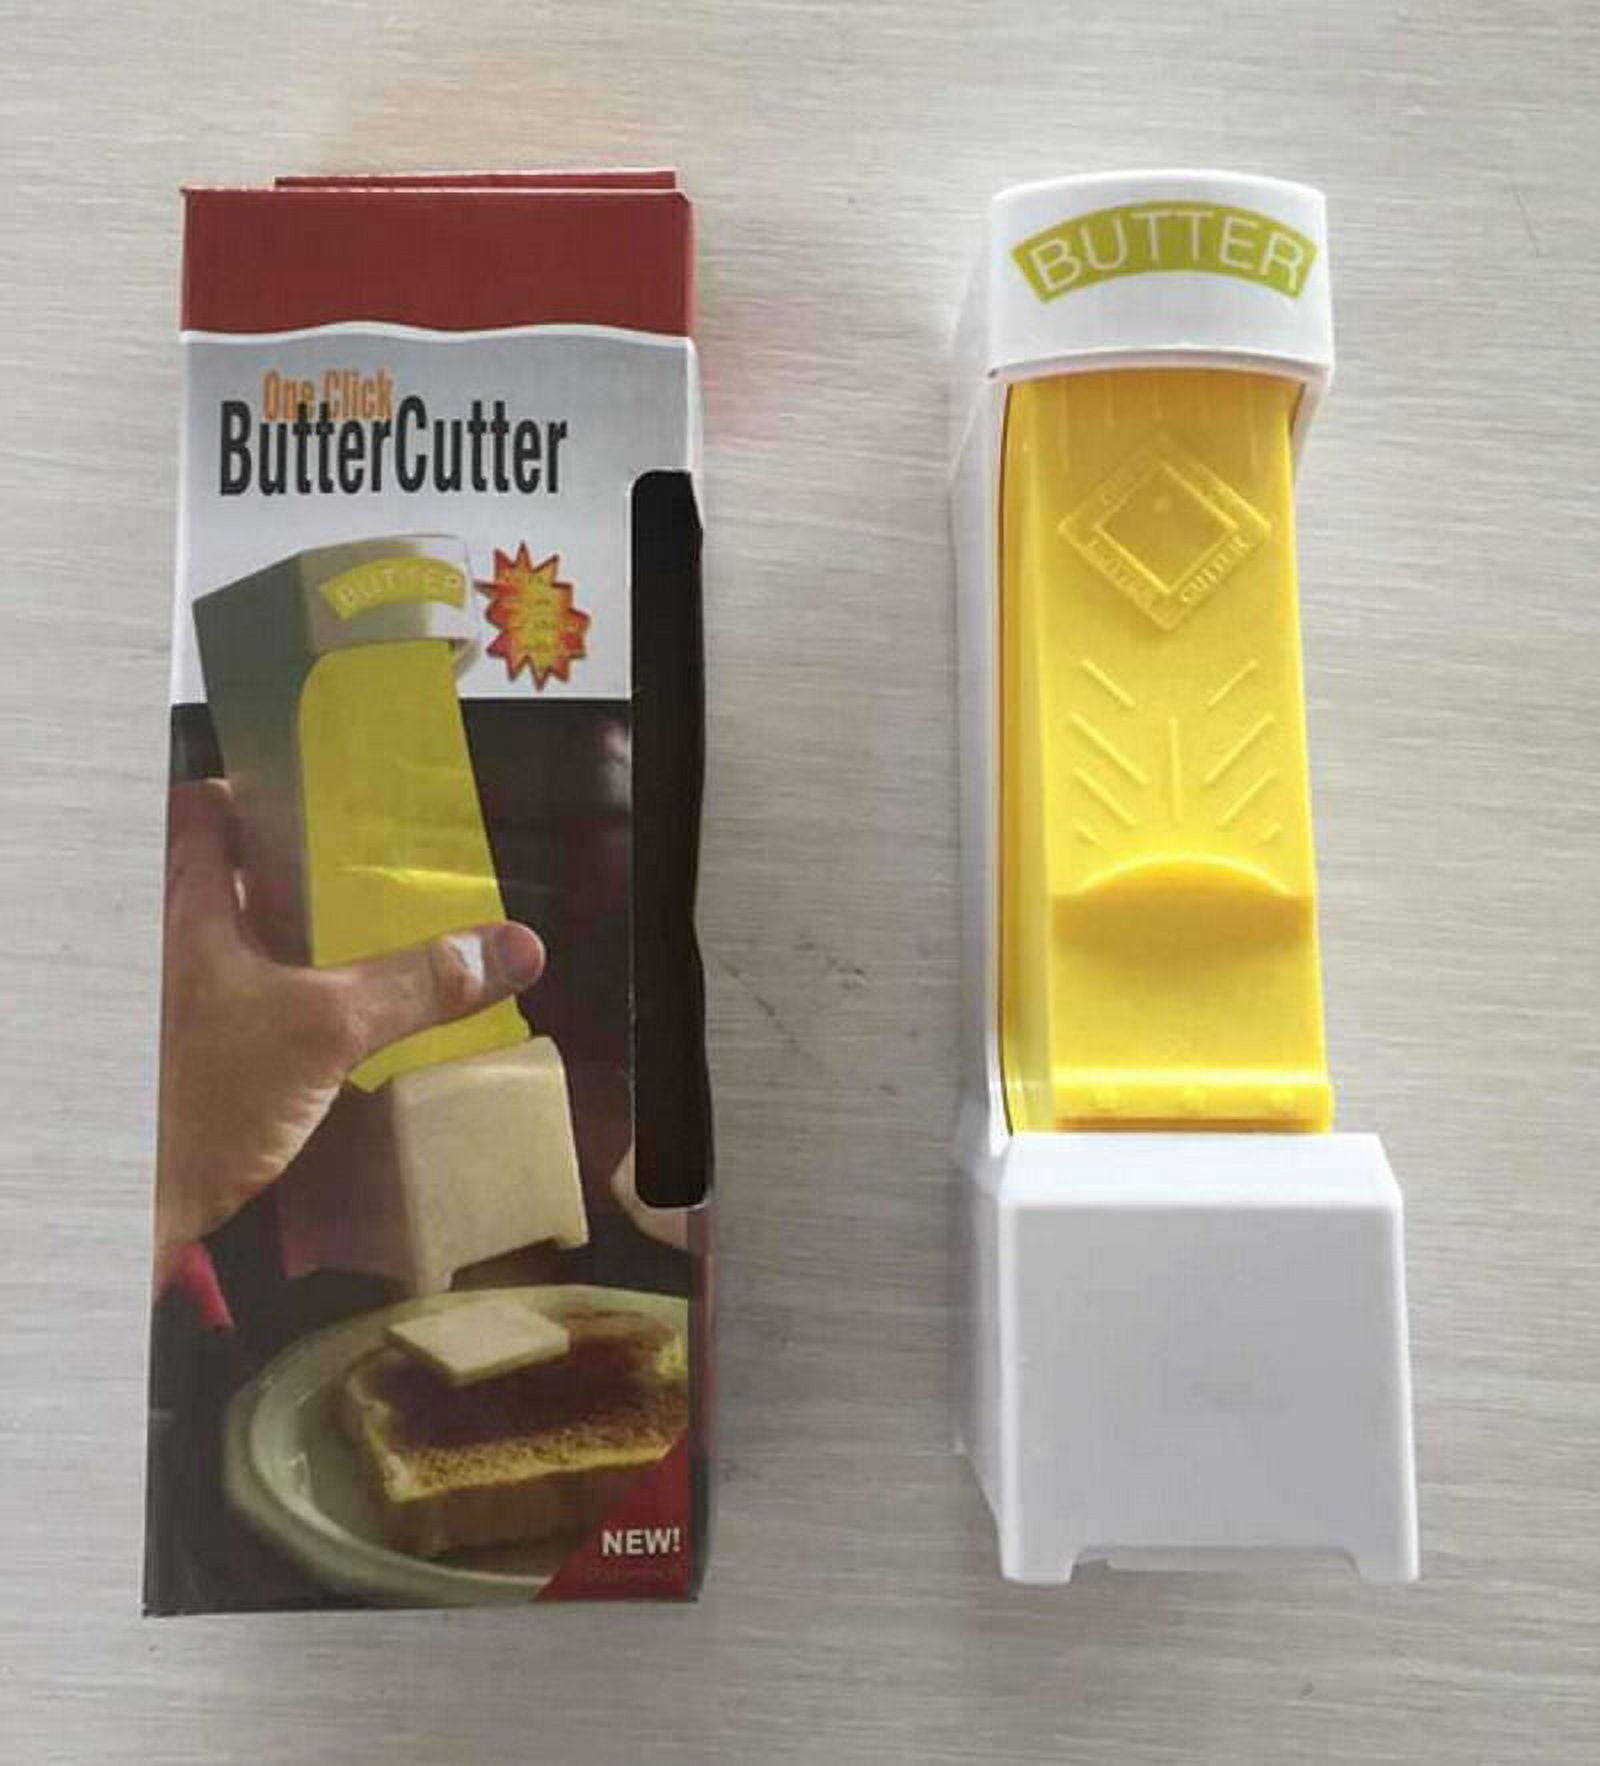 Gwong Butter Box Sealed Fresh-keeping PE Cheese Keeper with Cutter Slicer for Kitchen, Size: One size, White